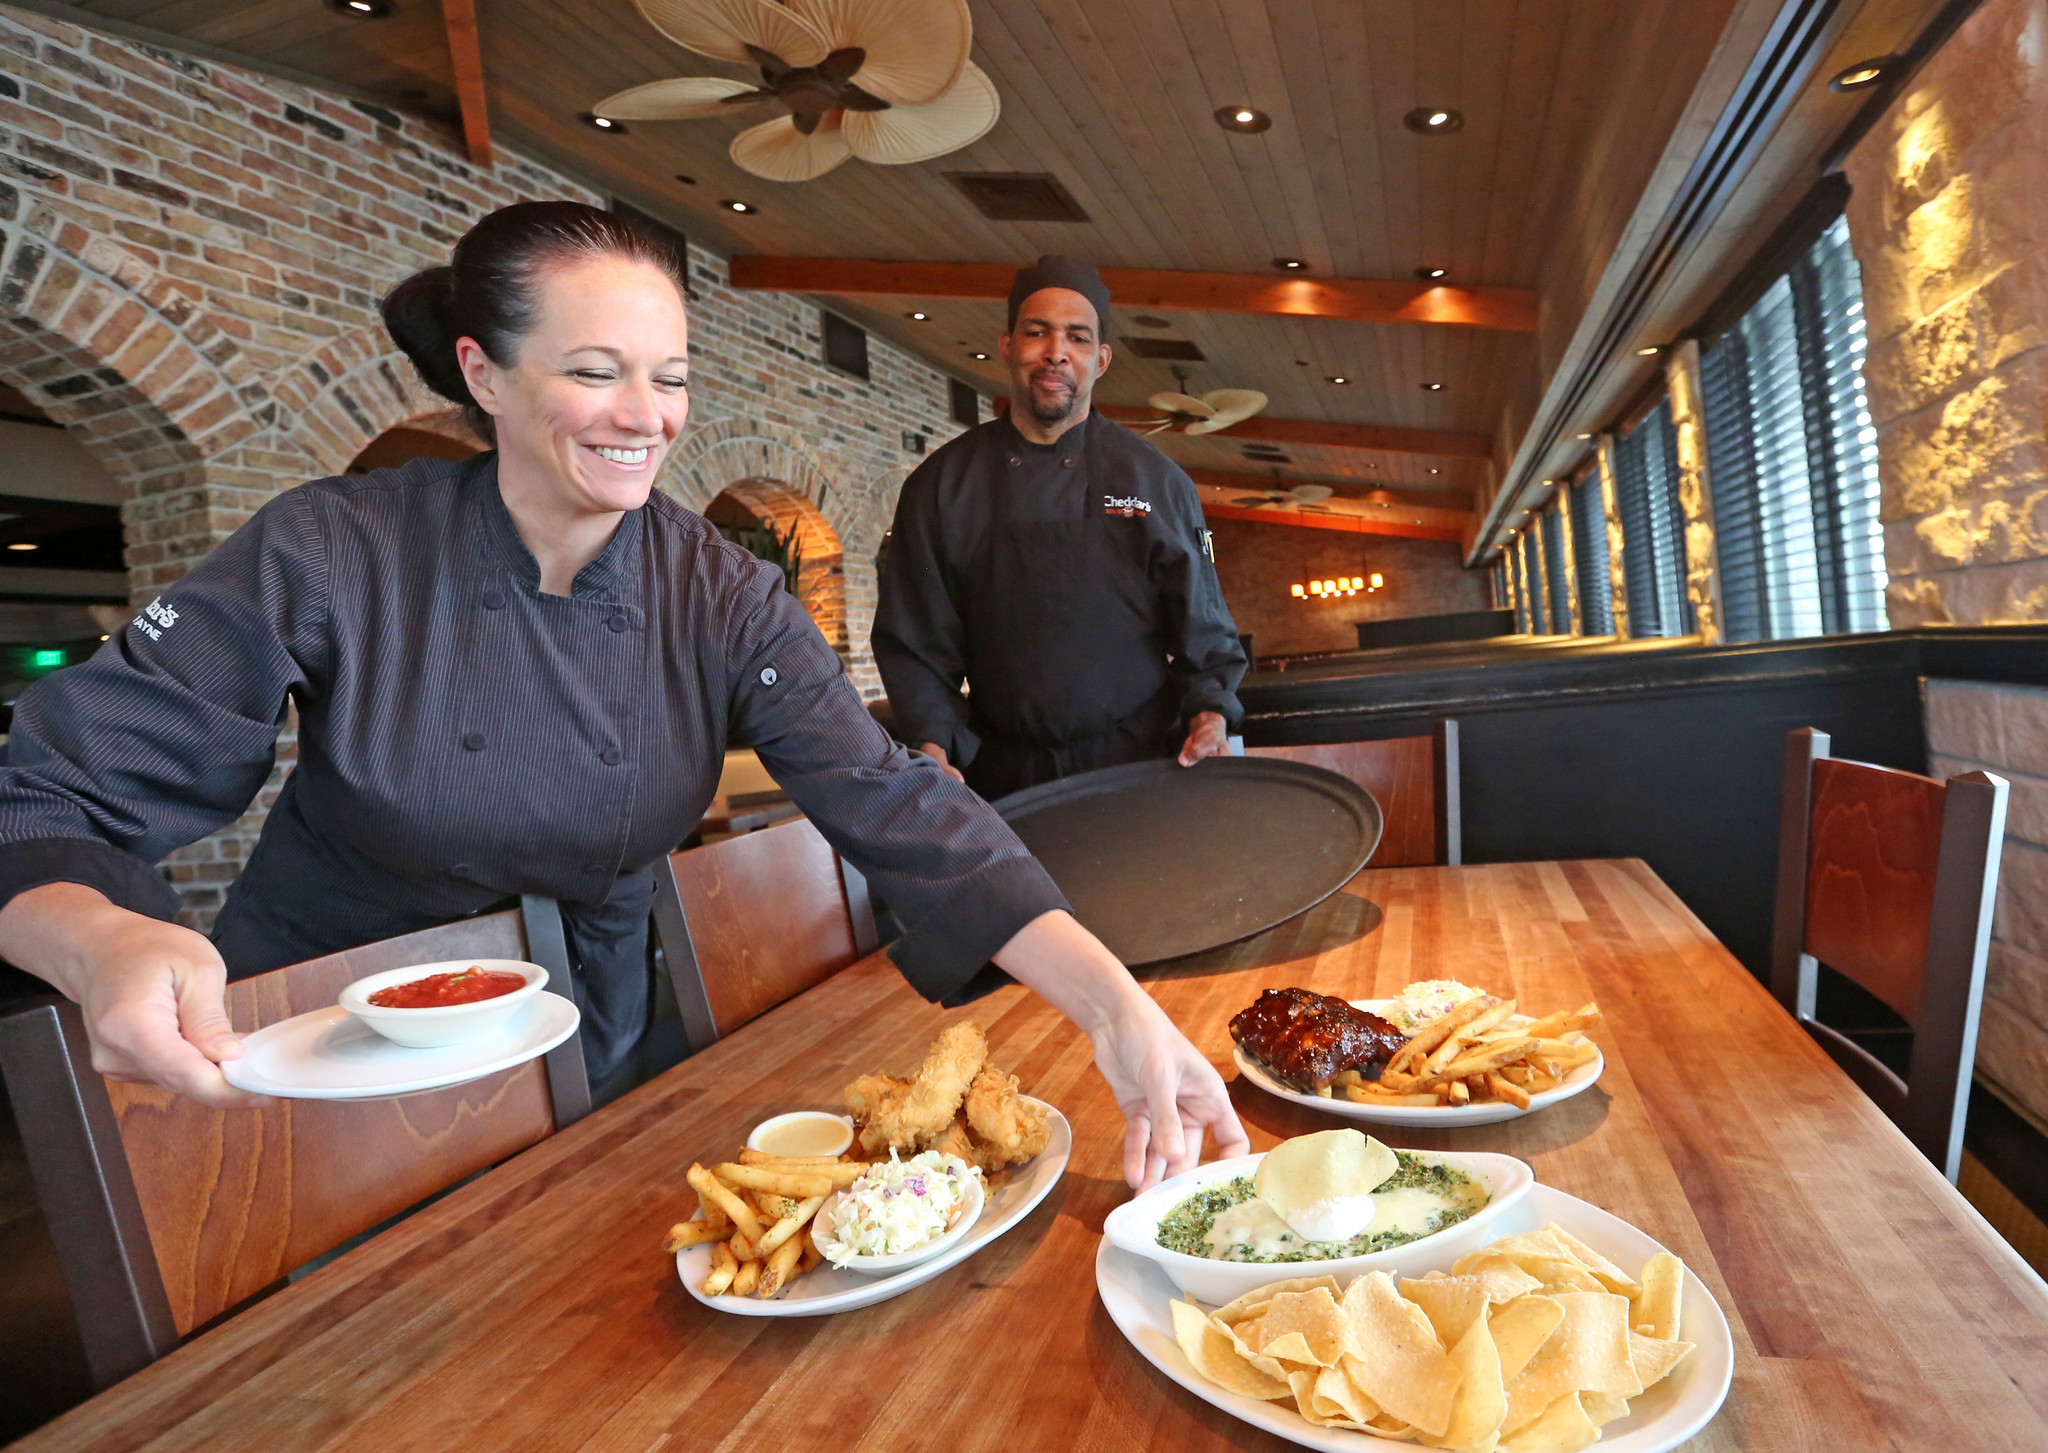 Low-priced Cheddar's challenges Darden's business model - Orlando Sentinel